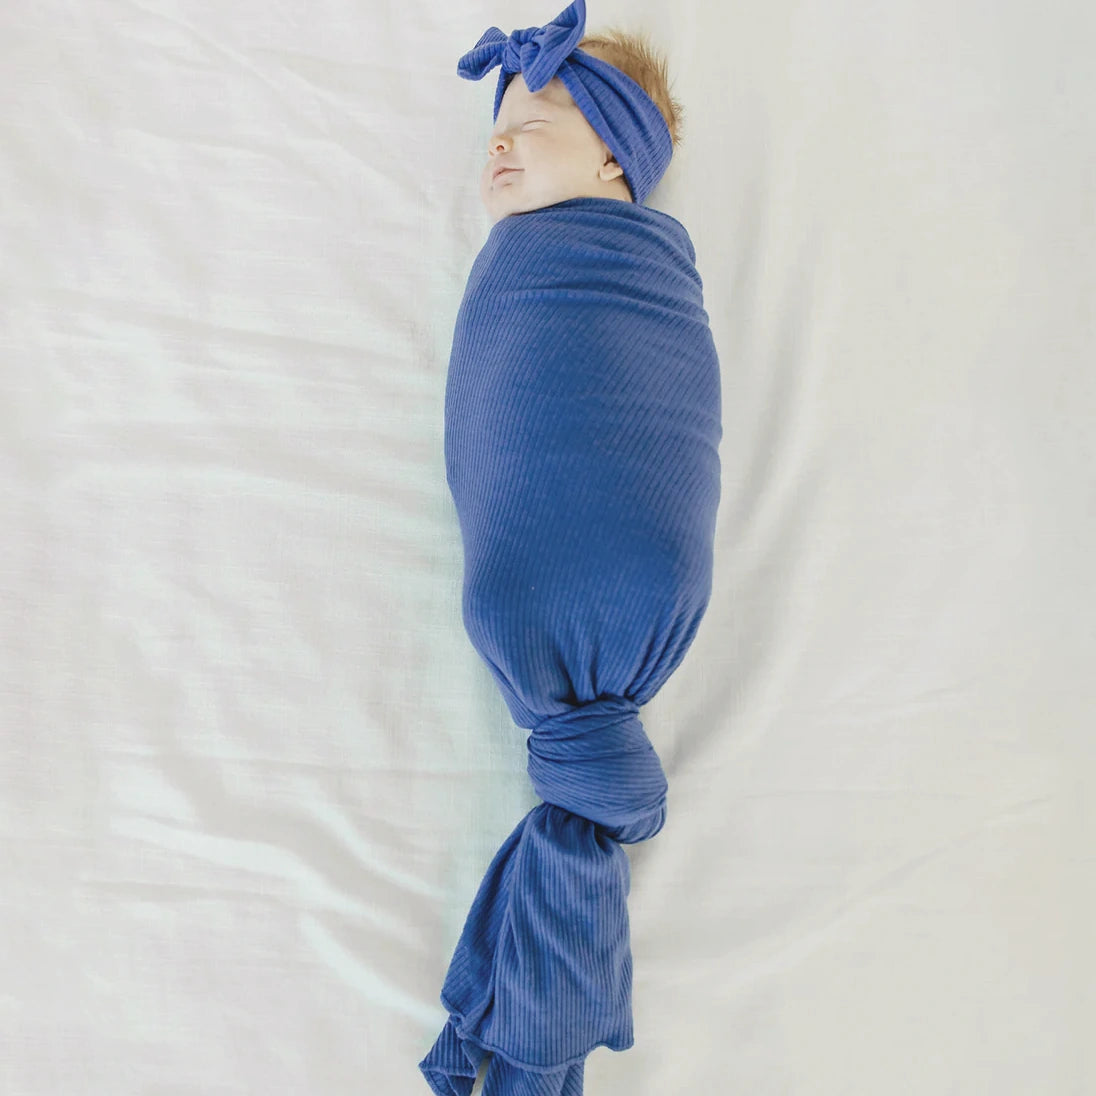 Baby wrapped in Copper Pearl Rib Knit Swaddle Blanket - Indigo